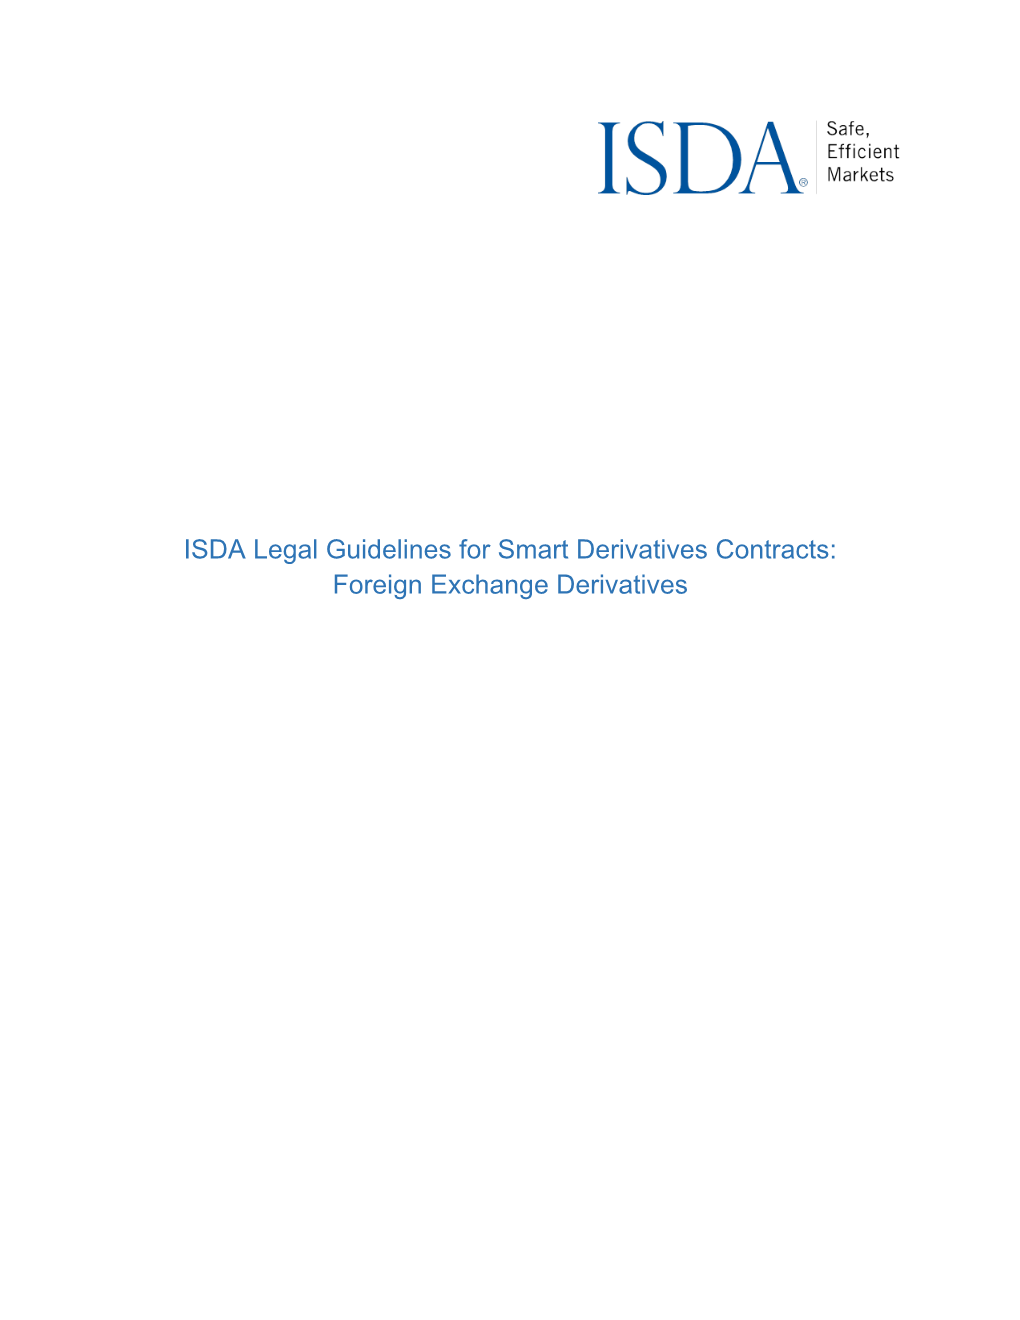 ISDA Legal Guidelines for Smart Derivatives Contracts: Foreign Exchange Derivatives